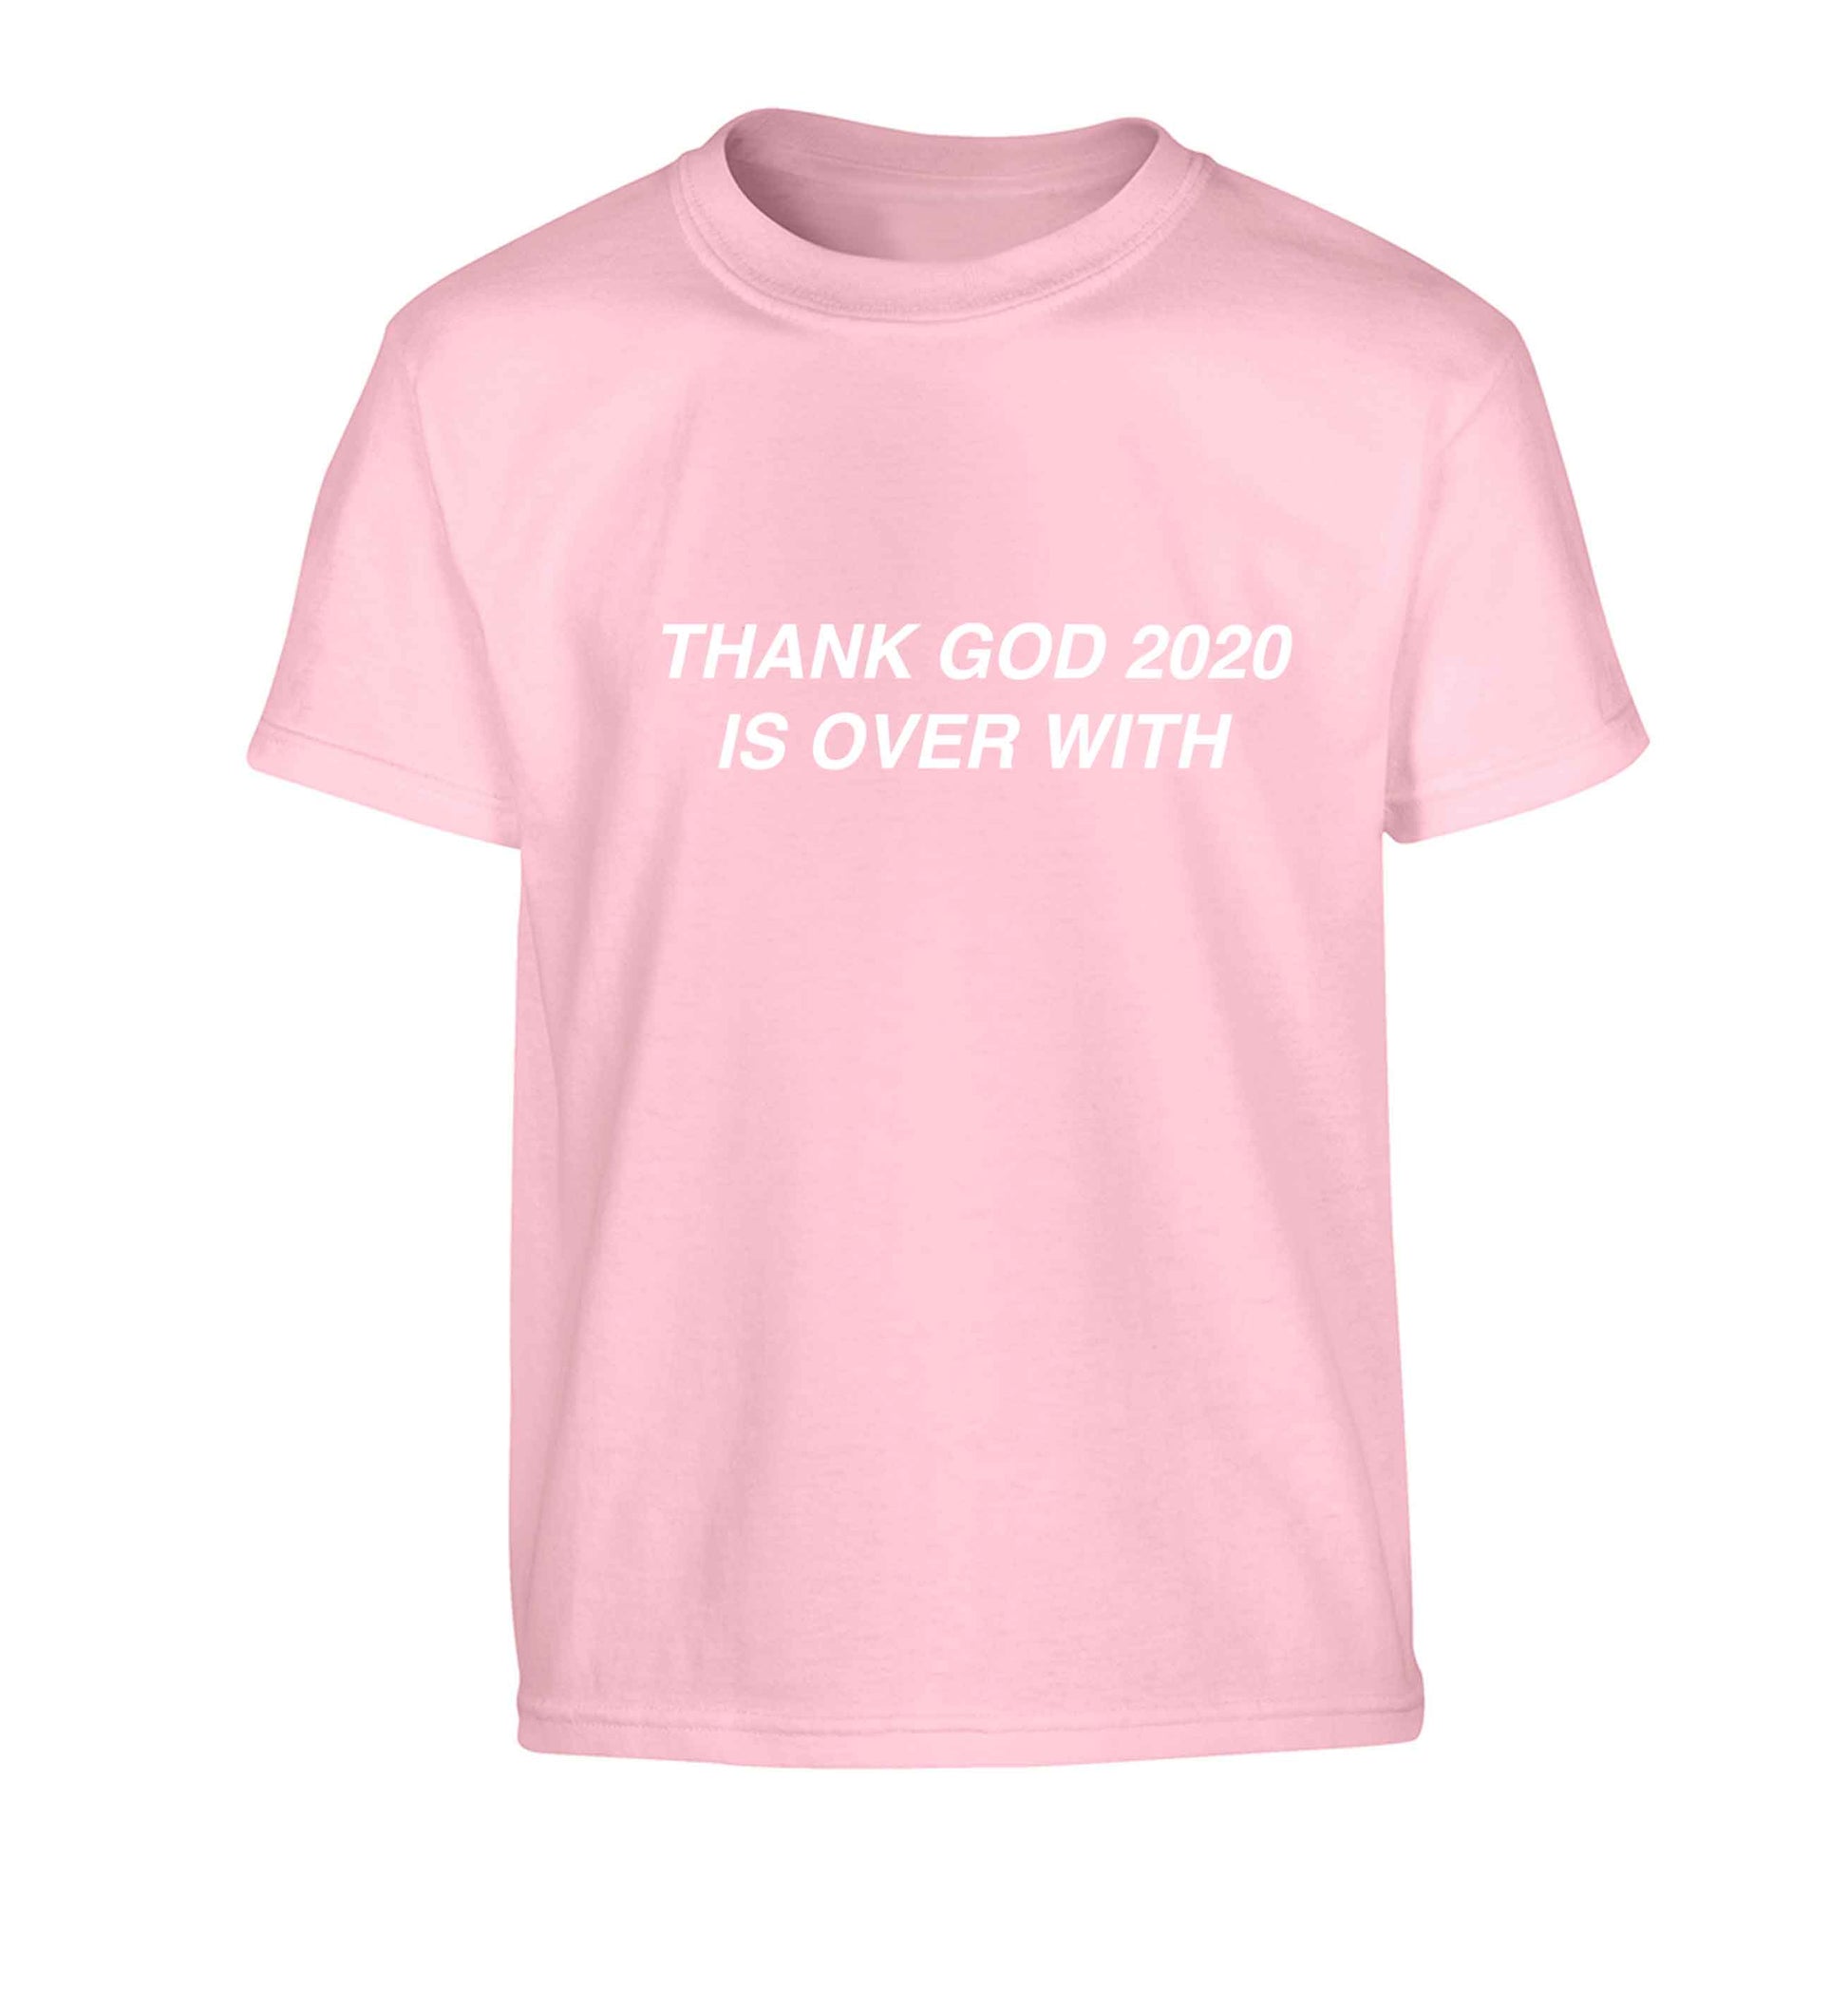 Thank god 2020 is over with Children's light pink Tshirt 12-13 Years